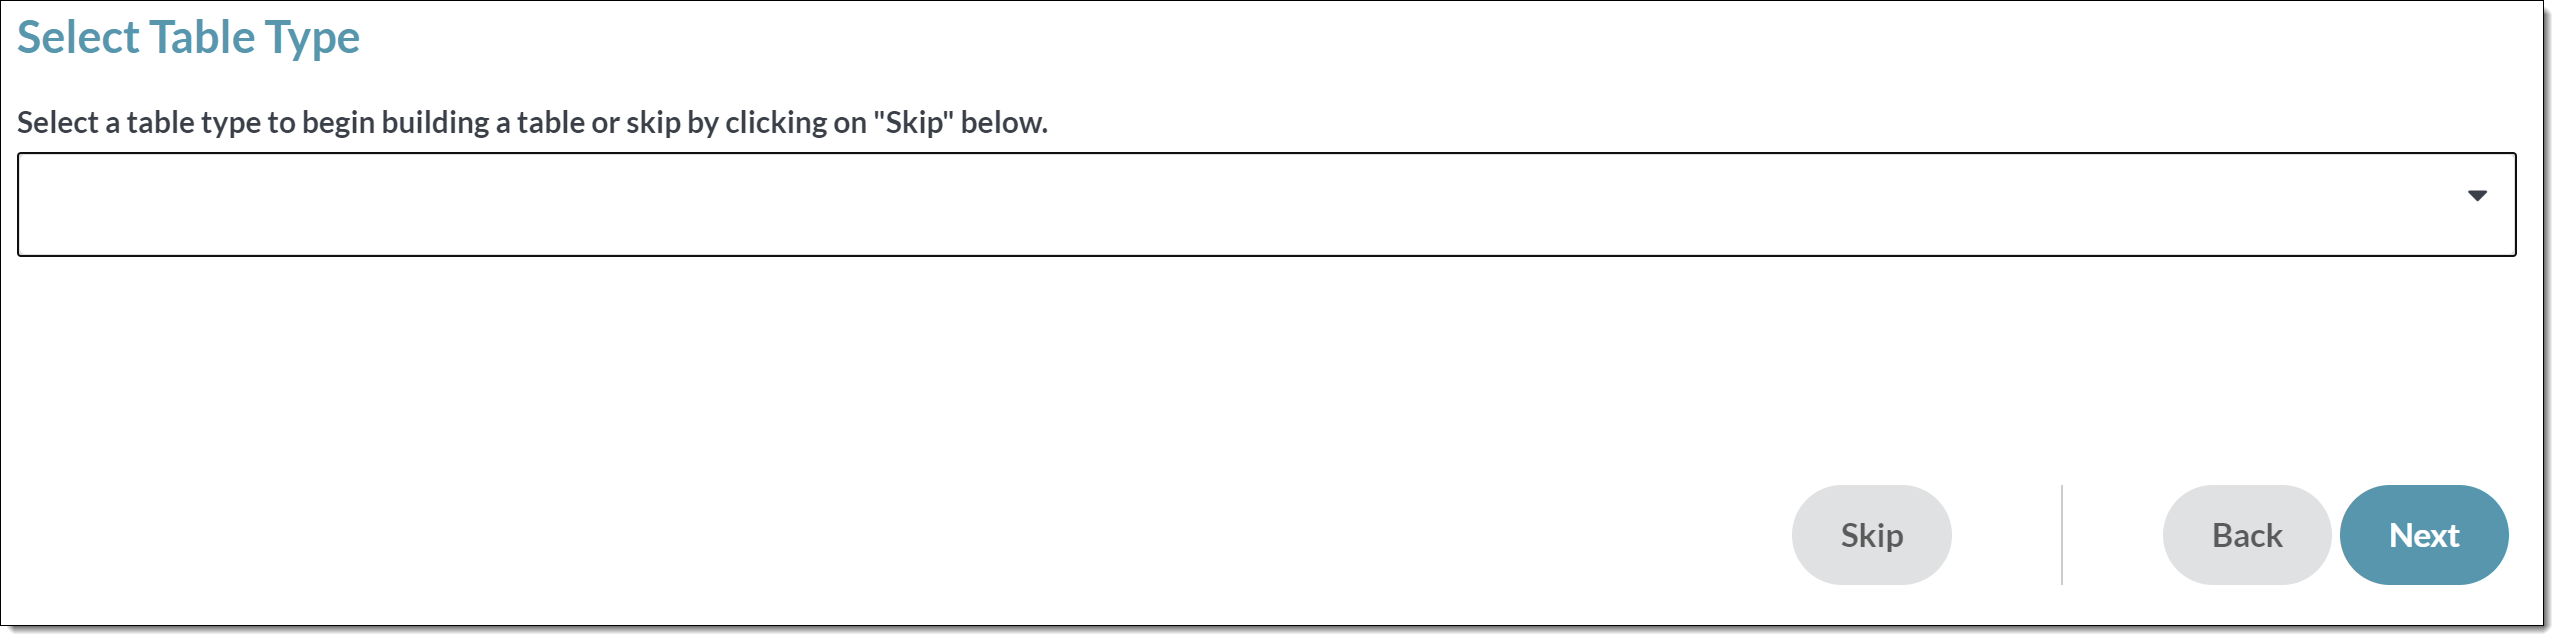 Screenshot of the Select Table Type screen in the Report Template wizard